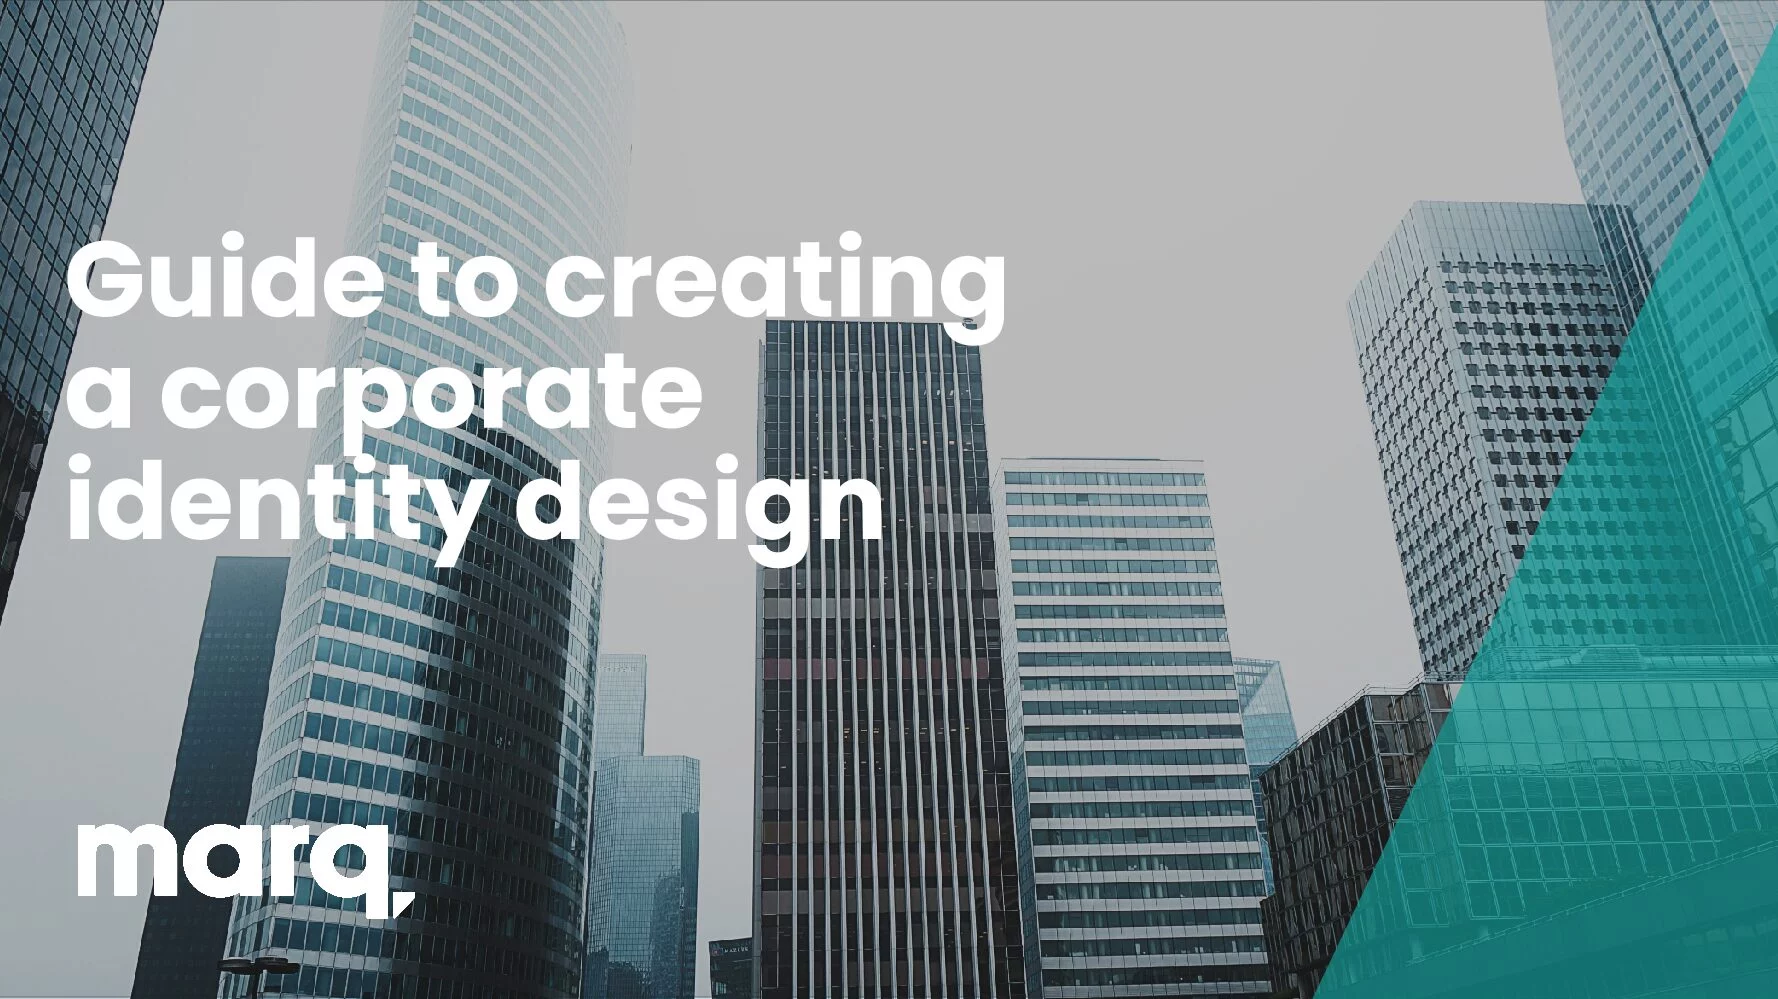 Guide to creating a corporate identity design